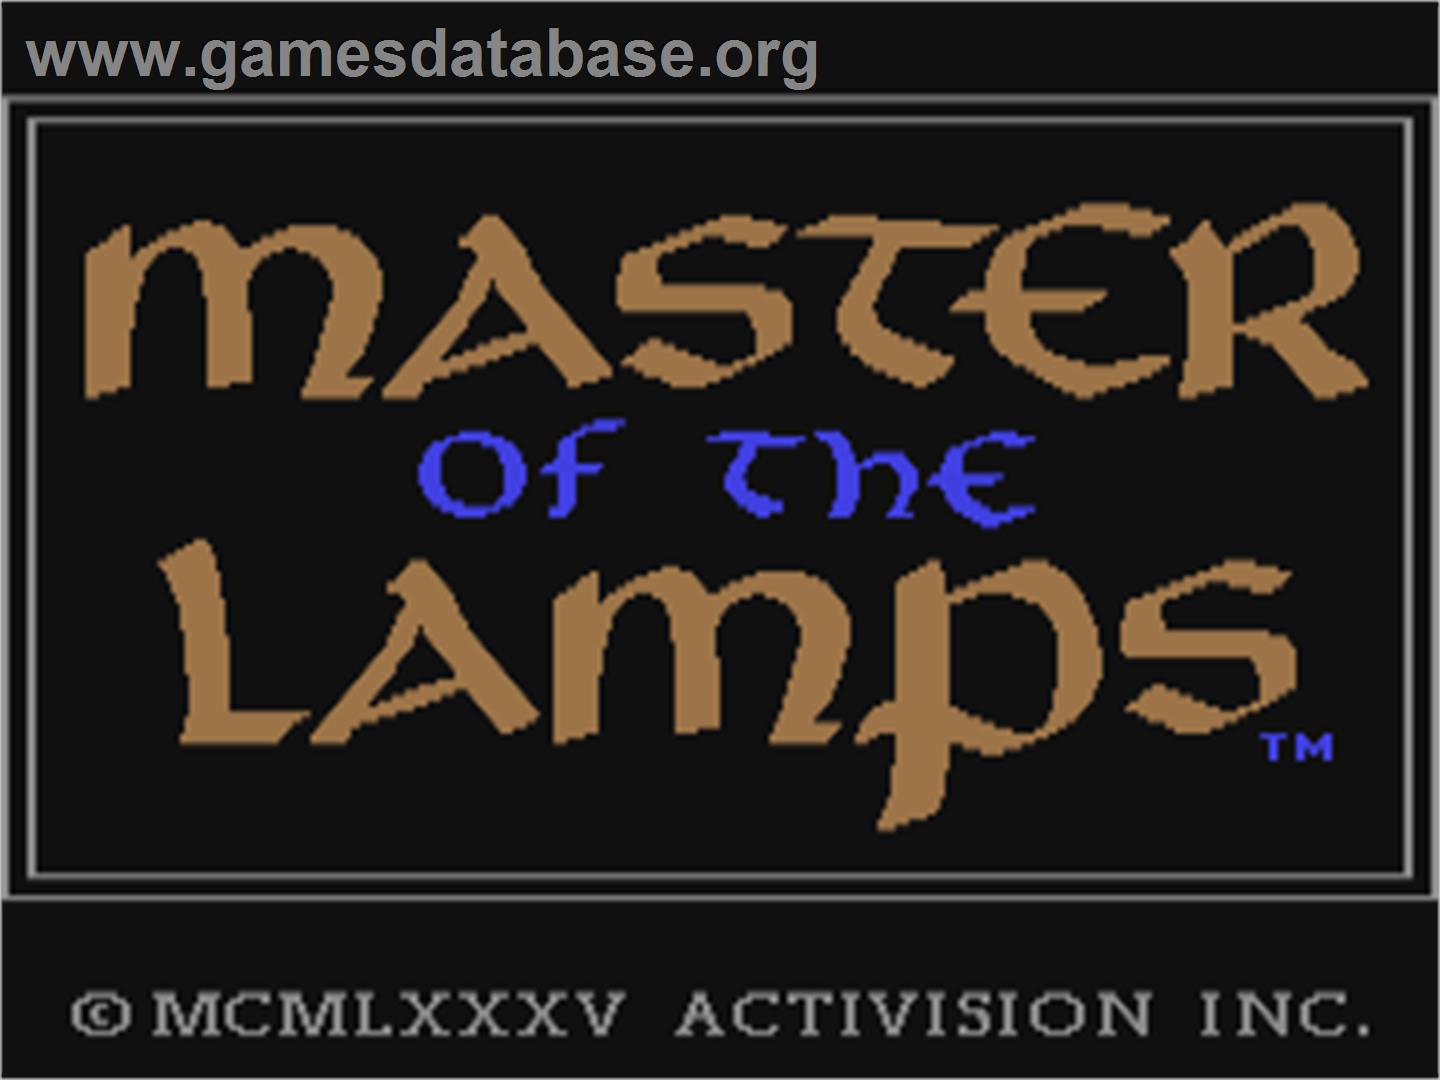 Master of the Lamps - Commodore 64 - Artwork - Title Screen